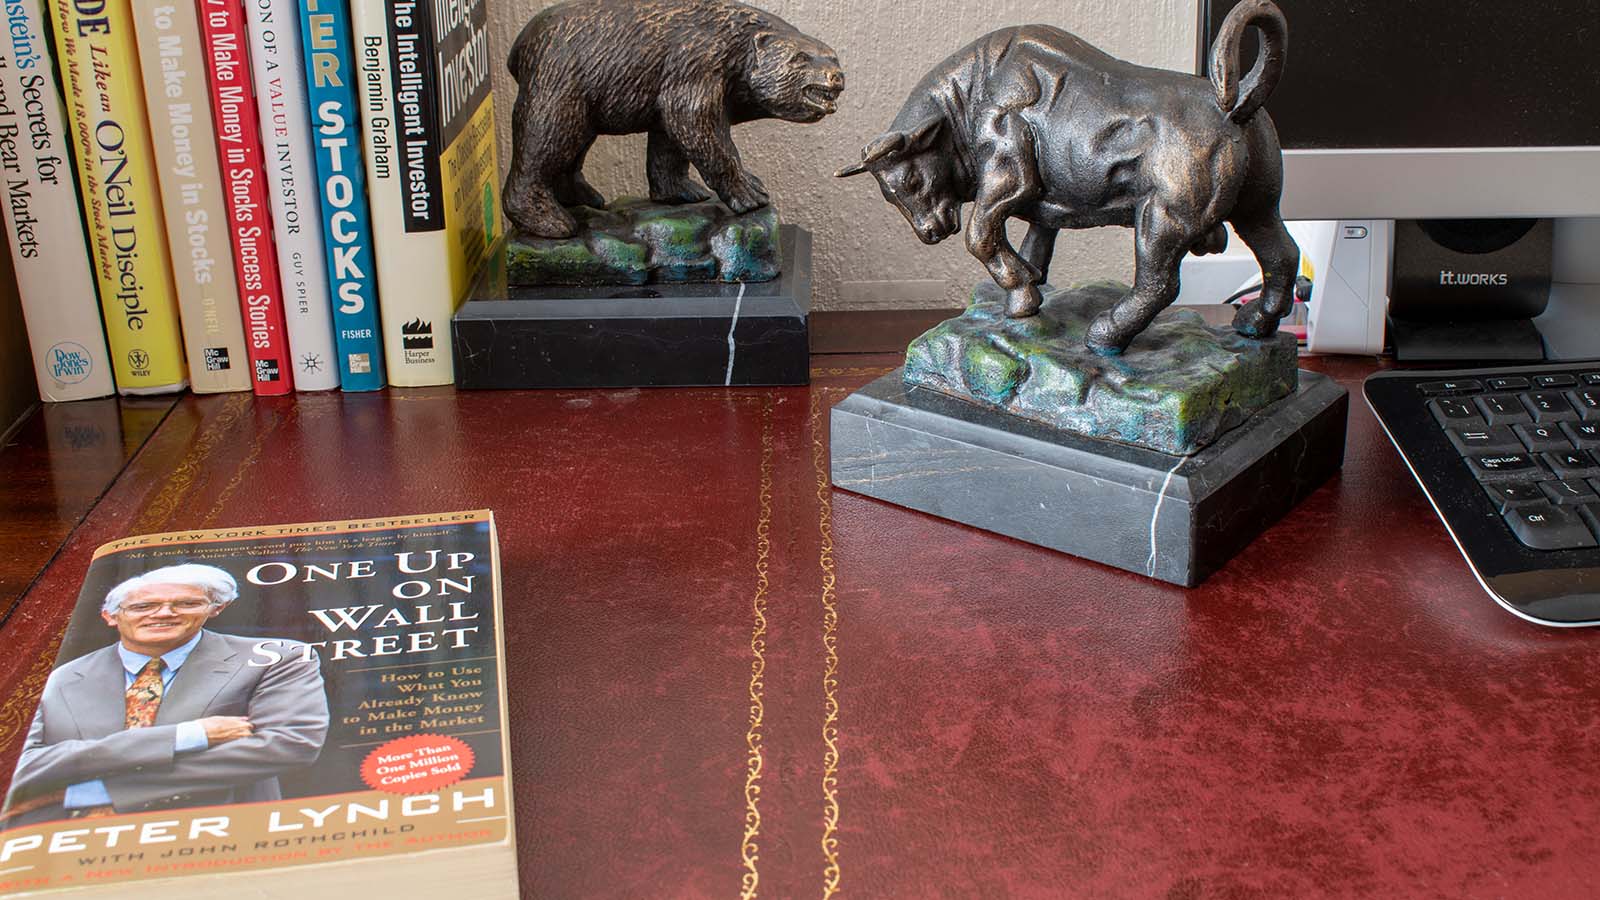 Peter Lynch's One Up on Wall Street sits on a desk next to bull and bear paperweights.